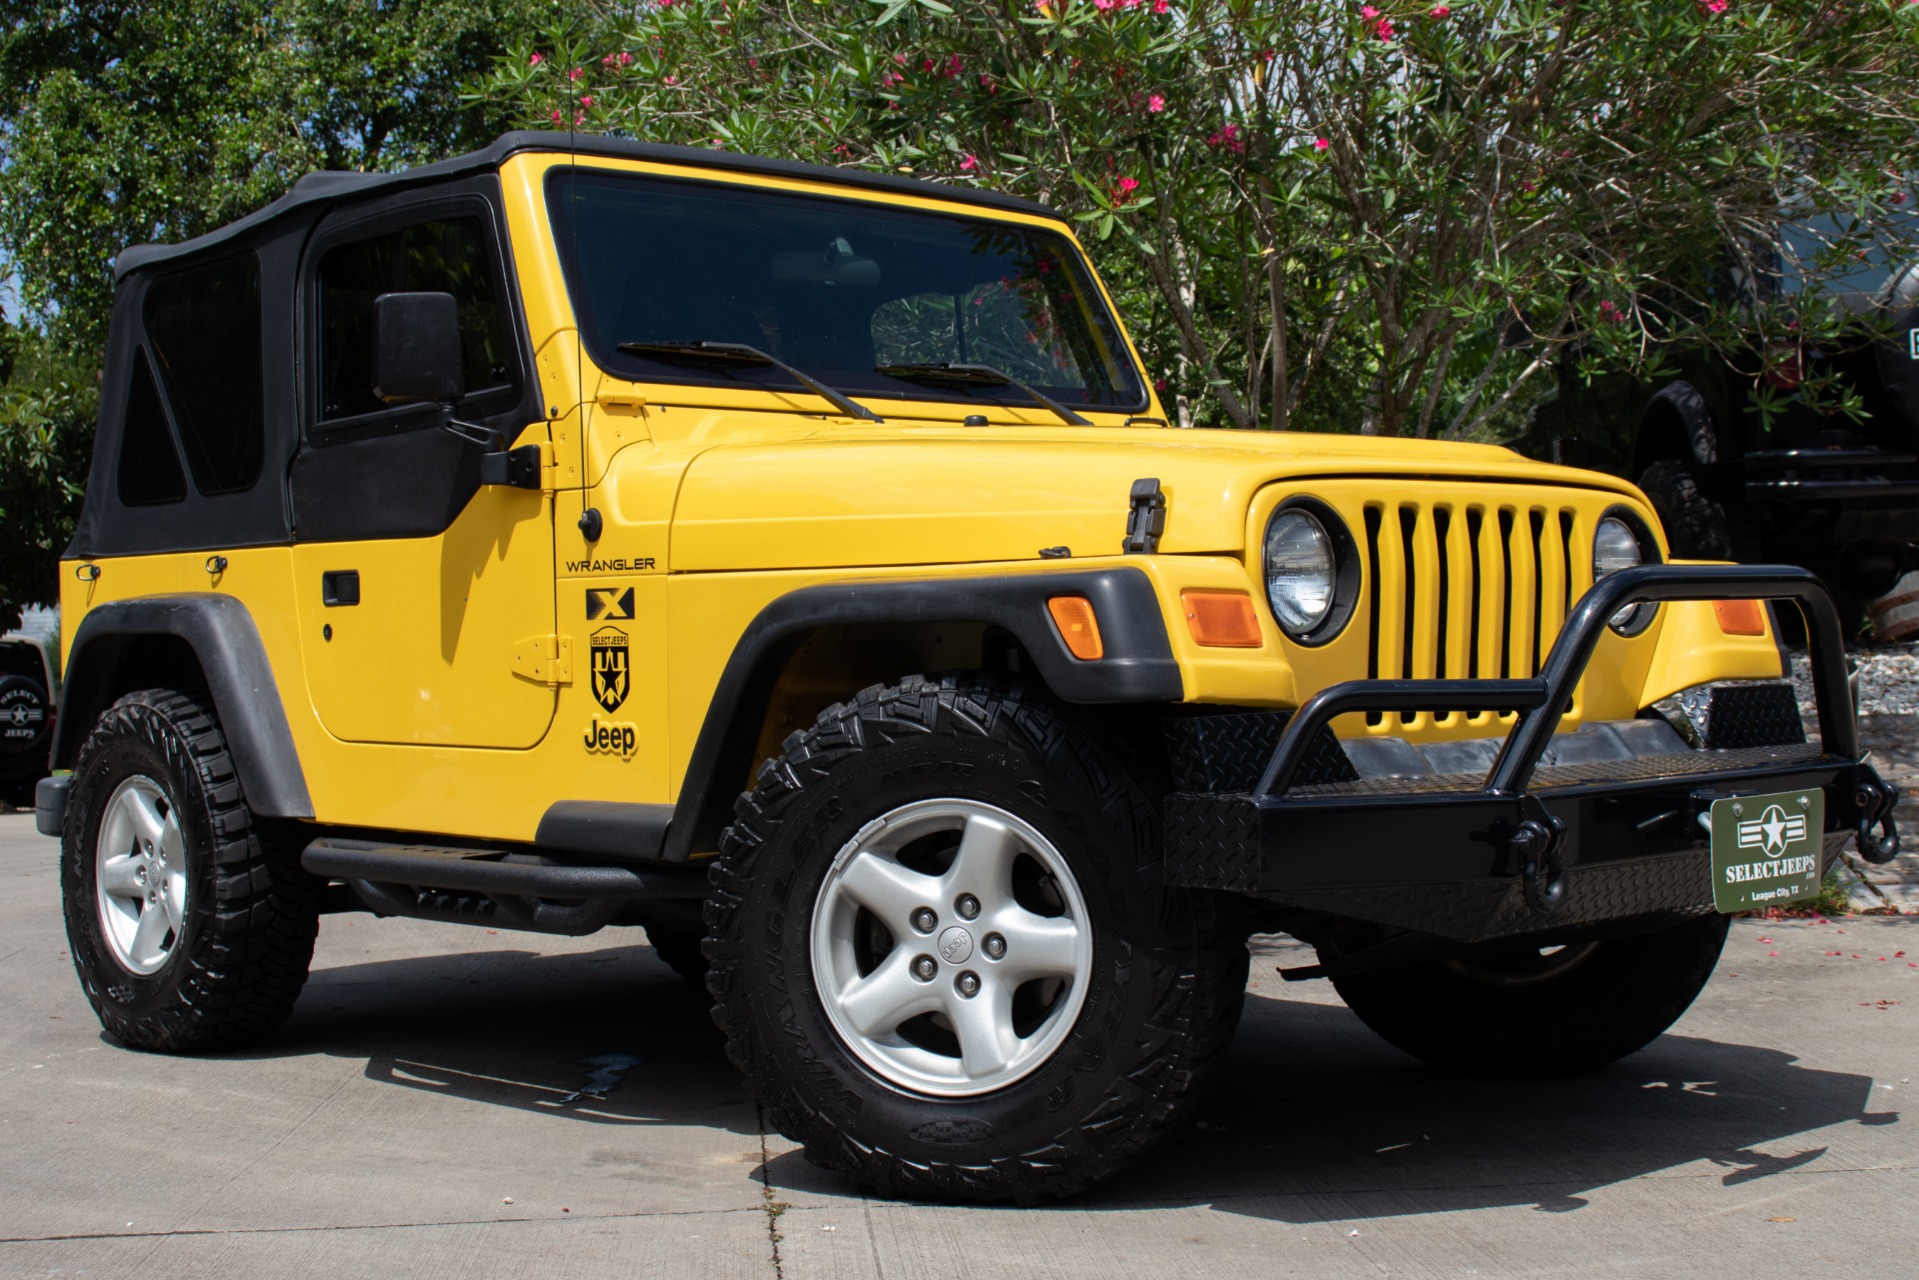 Used 2002 Jeep Wrangler X For Sale ($14,995) | Select Jeeps Inc. Stock  #711614